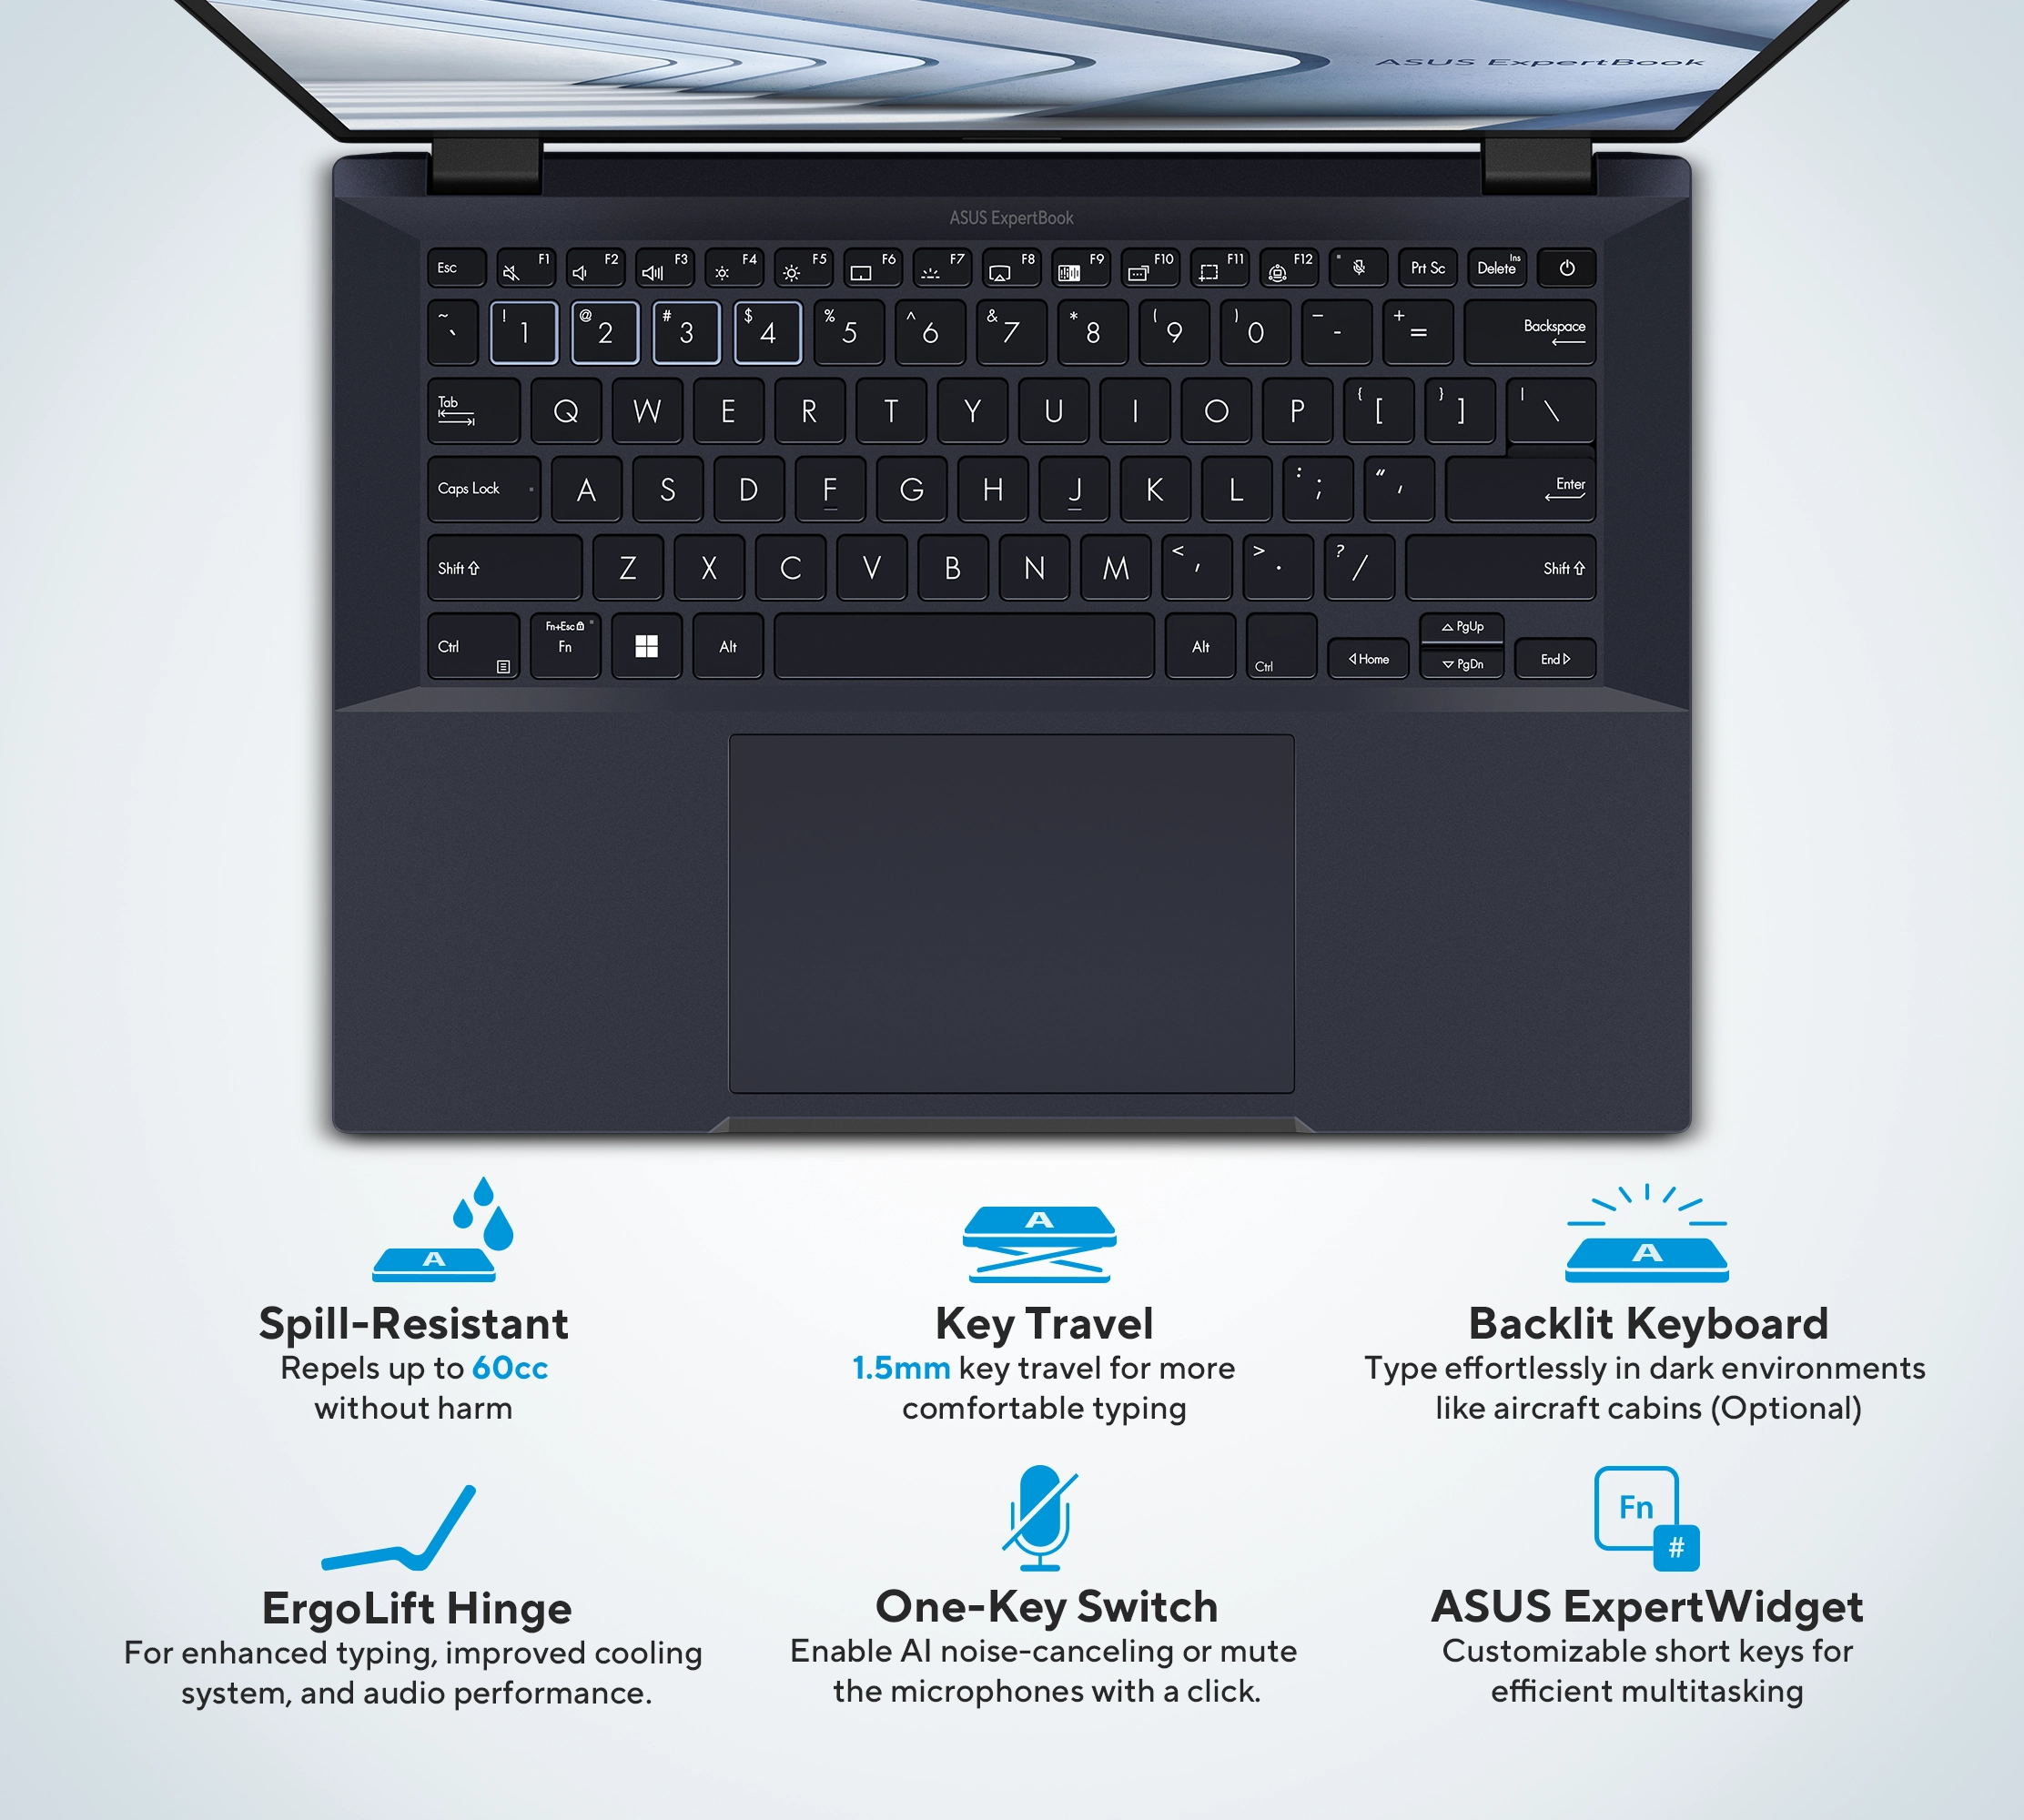  ASUS ExpertBook B3404 features a spill-resistant keyboard designed to withstand accidental spills of up to 60cc, ensuring durability and peace of mind during busy workdays